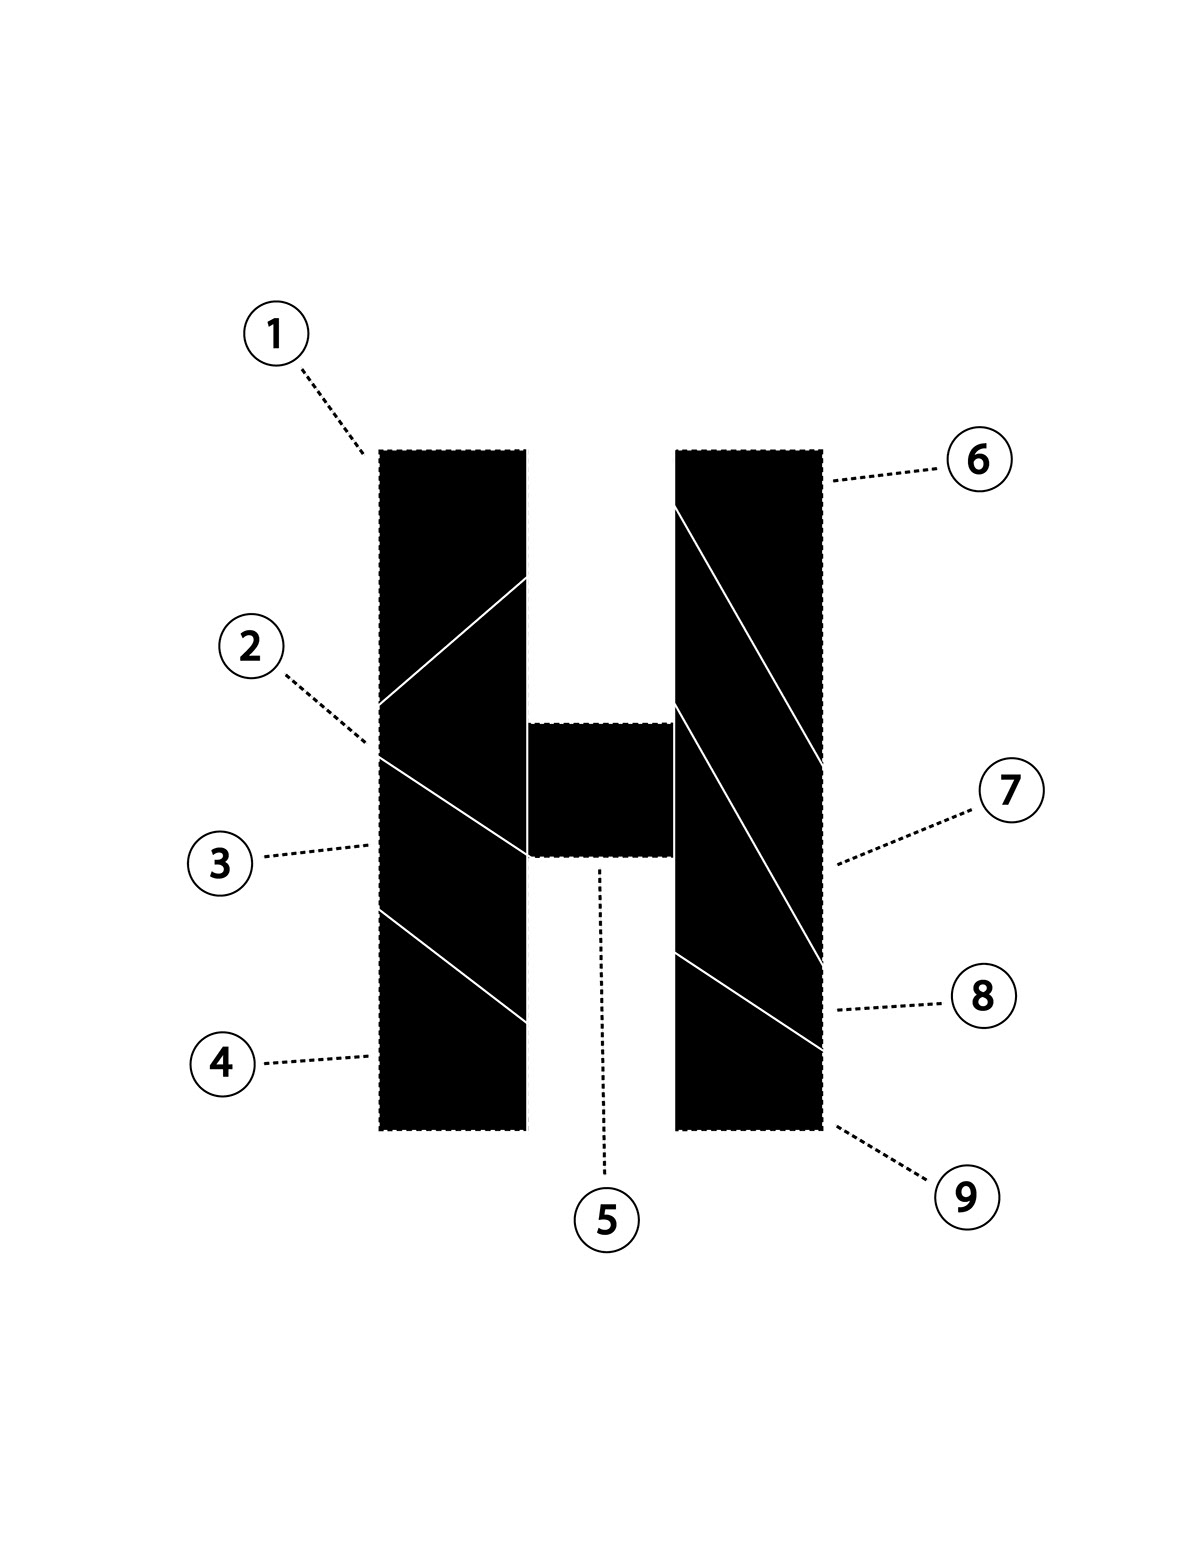 devide letter h 9 sections 4 lines waterfall pattern wave